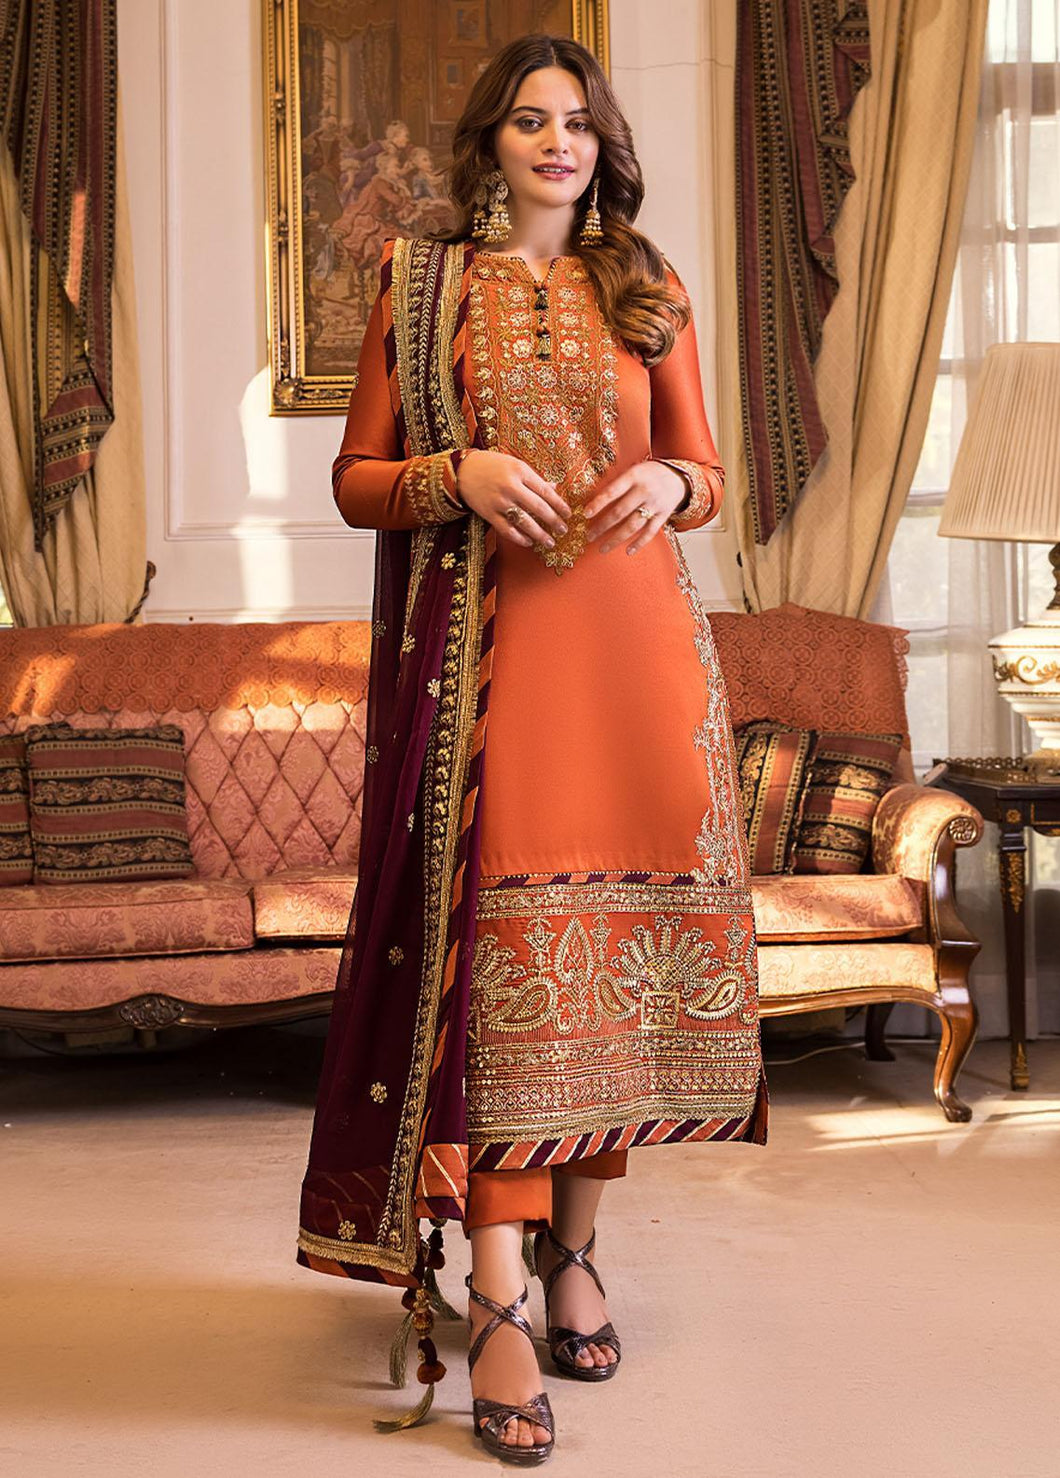 Buy ASIM JOFA | MAAHRU AND NOORIE '23 orange exclusive slik collection of ASIM JOFA WEDDING COLLECTION 2023 from our website. We have various PAKISTANI DRESSES ONLINE IN UK, ASIM JOFA CHIFFON COLLECTION 2021. Get your unstitched or customized PAKISATNI BOUTIQUE IN UK, USA, FRACE , QATAR, DUBAI from Lebaasonline at SALE!